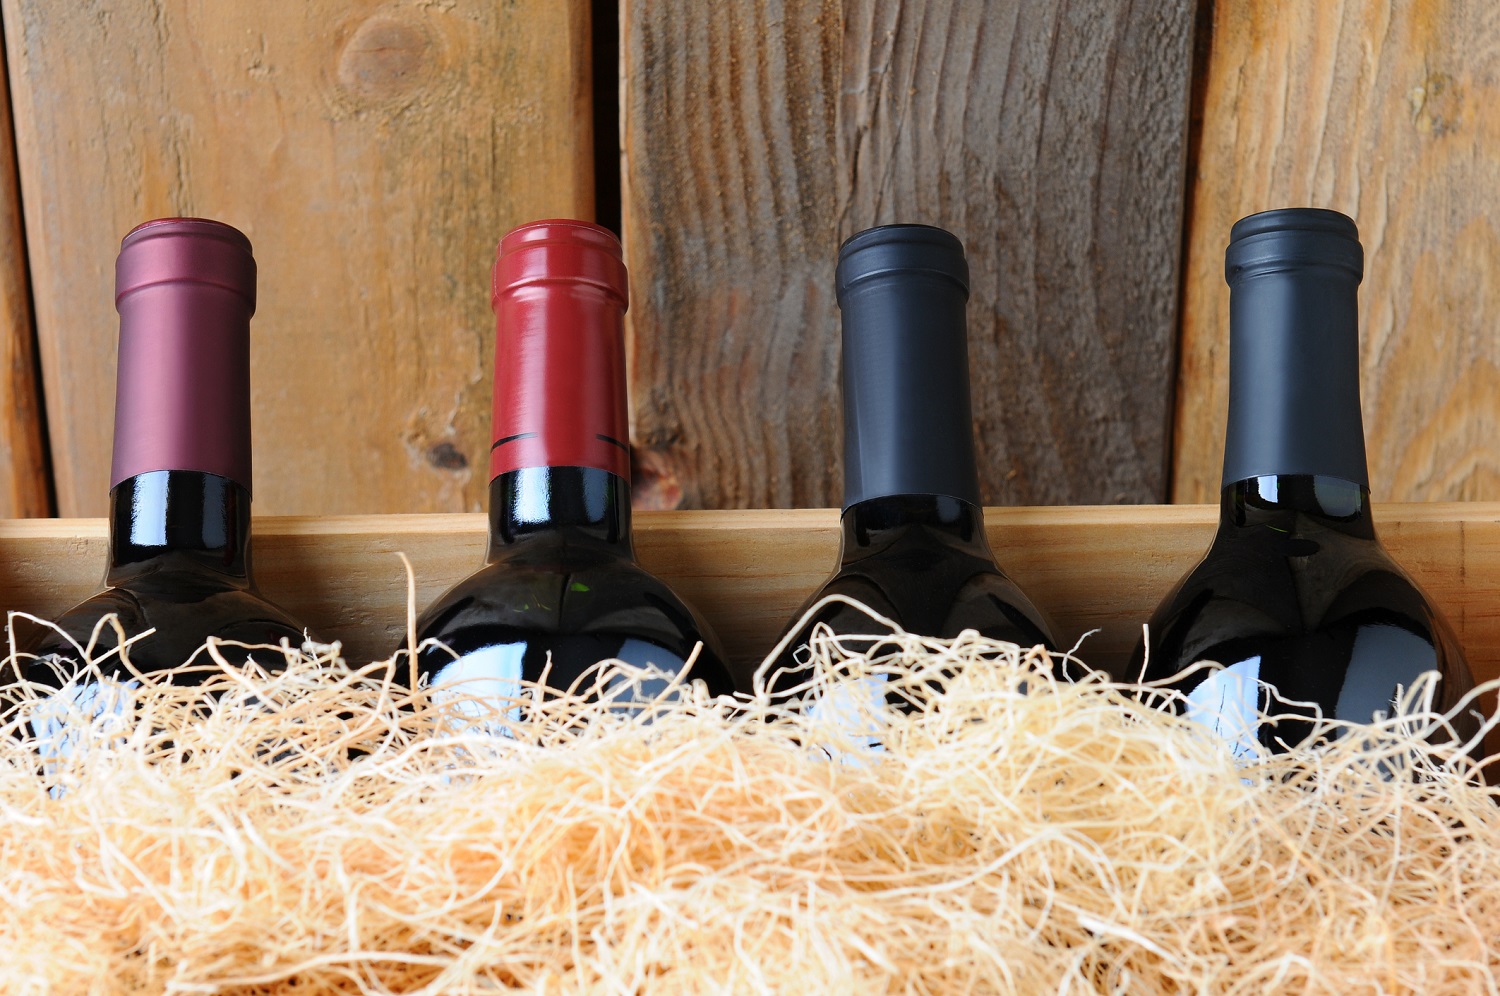 Closeup of four different wine bottles in a wooden crate with straw packing material.